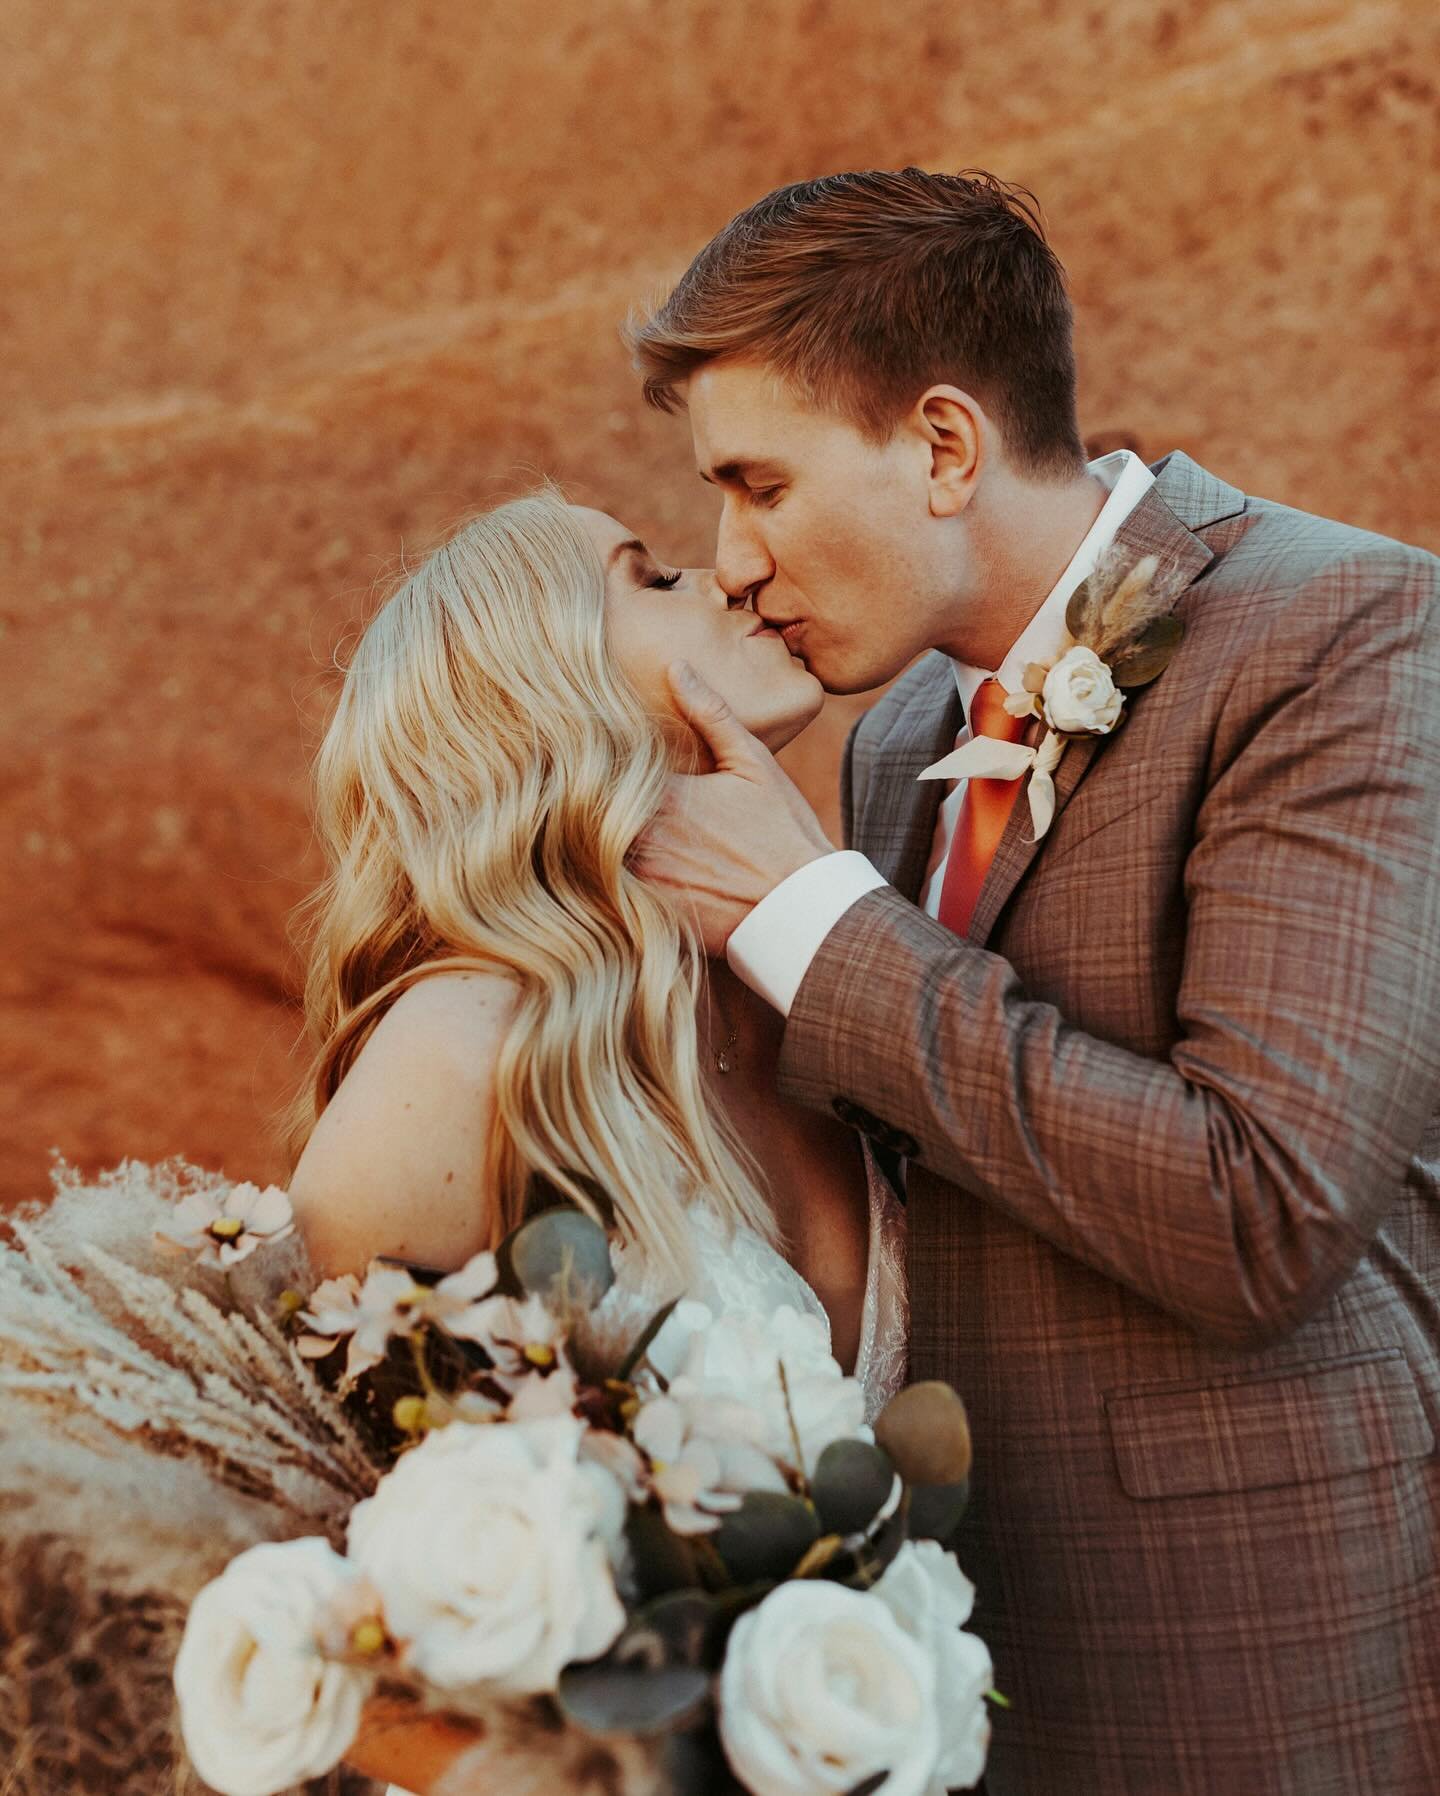 Red Rock Canyon on a warm spring day 💕 followed by an adventure around Garden of the Gods after sunset ✨a picture perfect elopement! 
&bull;
&bull;
&bull;
&bull;
&bull;
&bull;
#elopementphotographer&nbsp;#elopementphotography&nbsp;#coloradospringsph